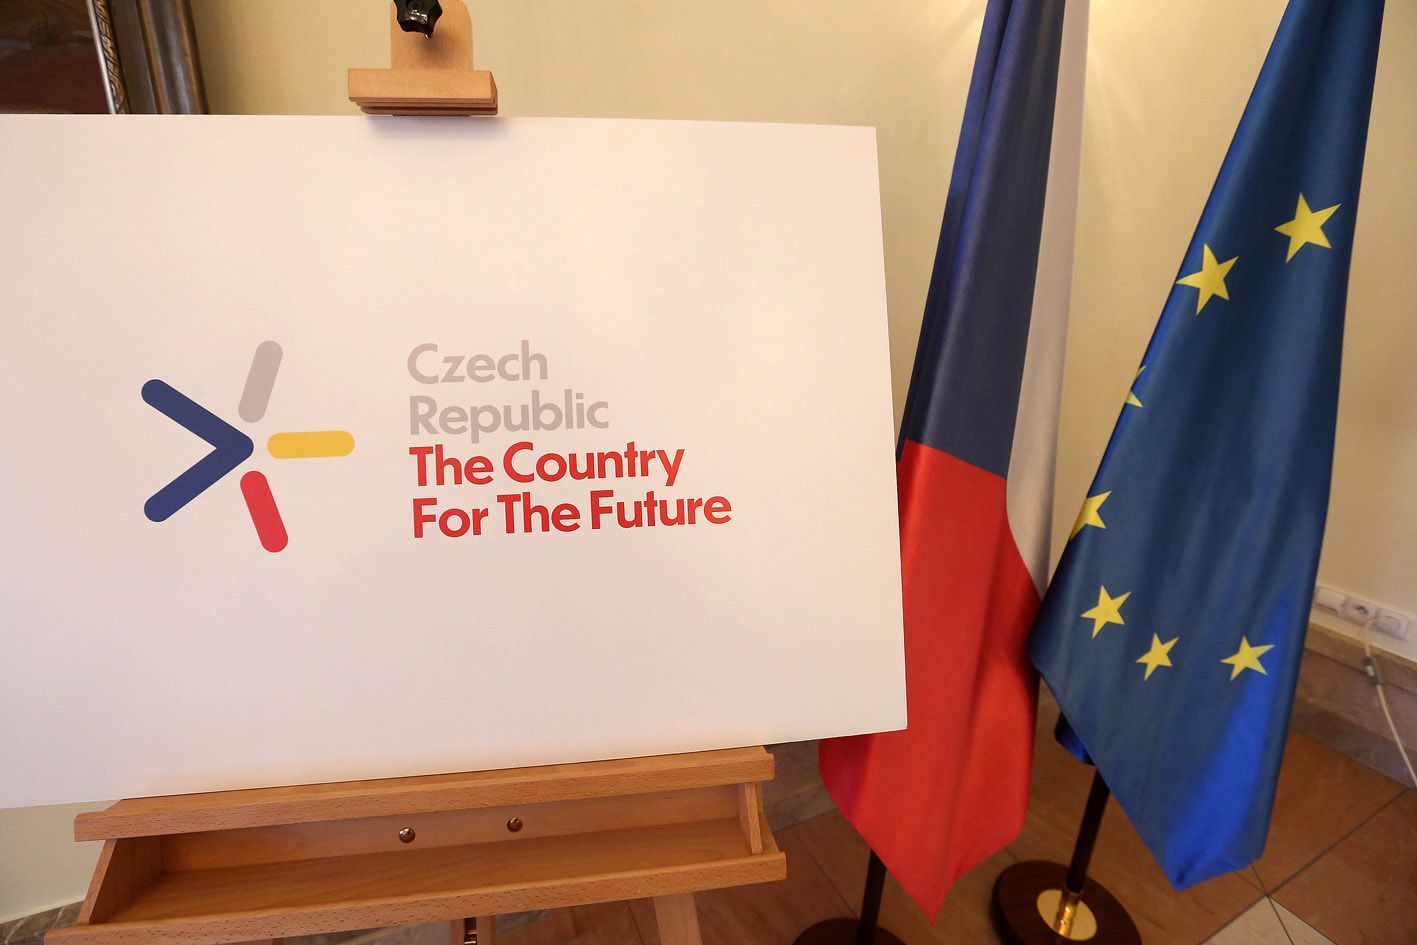 The Czech Republic: The Country For The Future